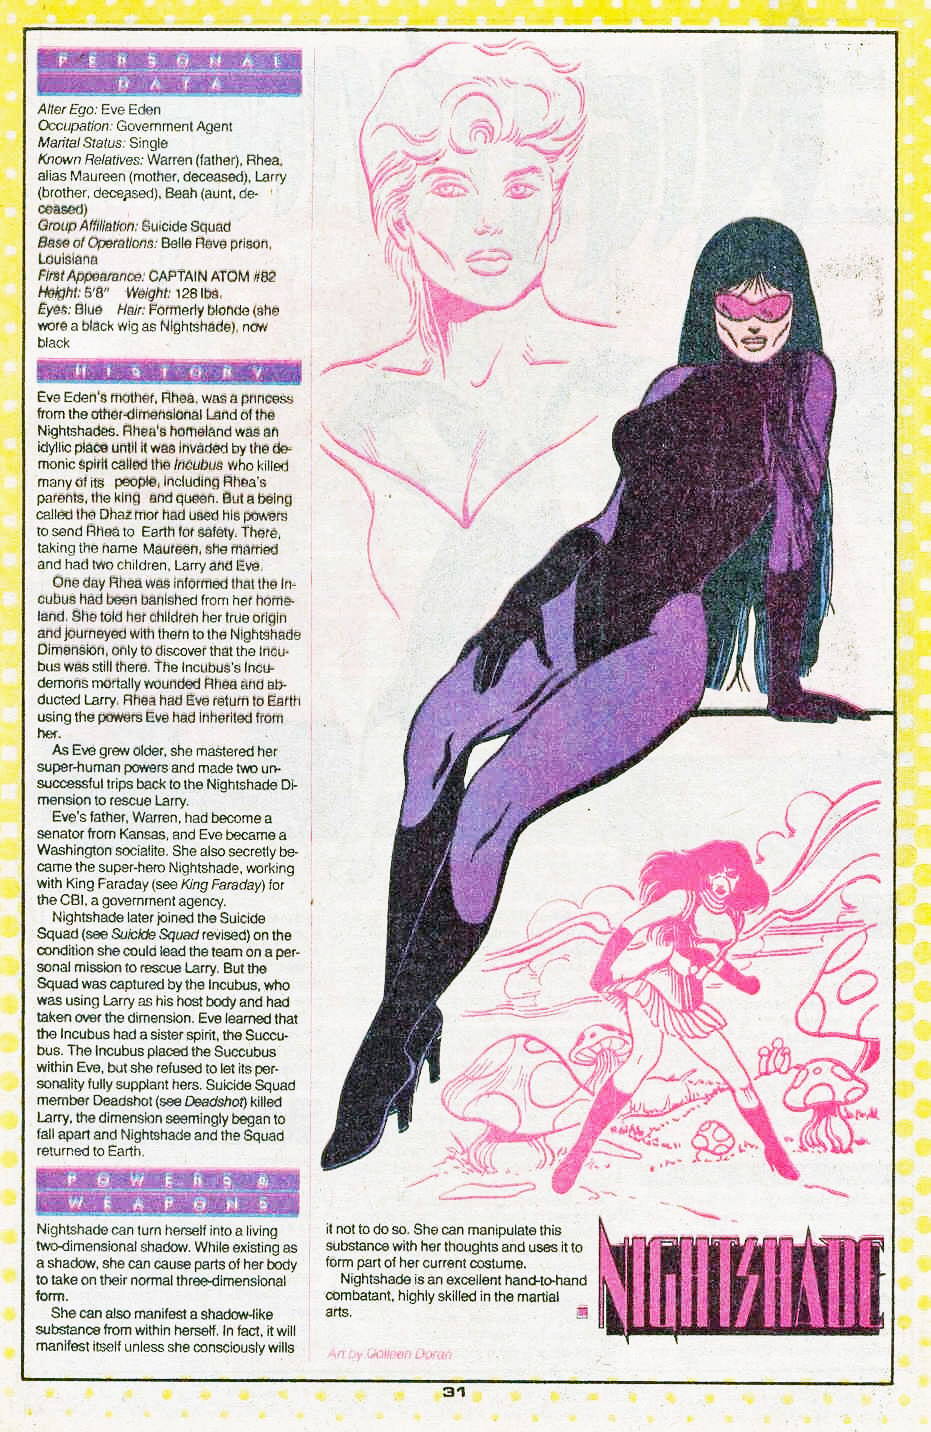 Who’s Who Update ‘88 #2 (Sept 1988) by Colleen Doran